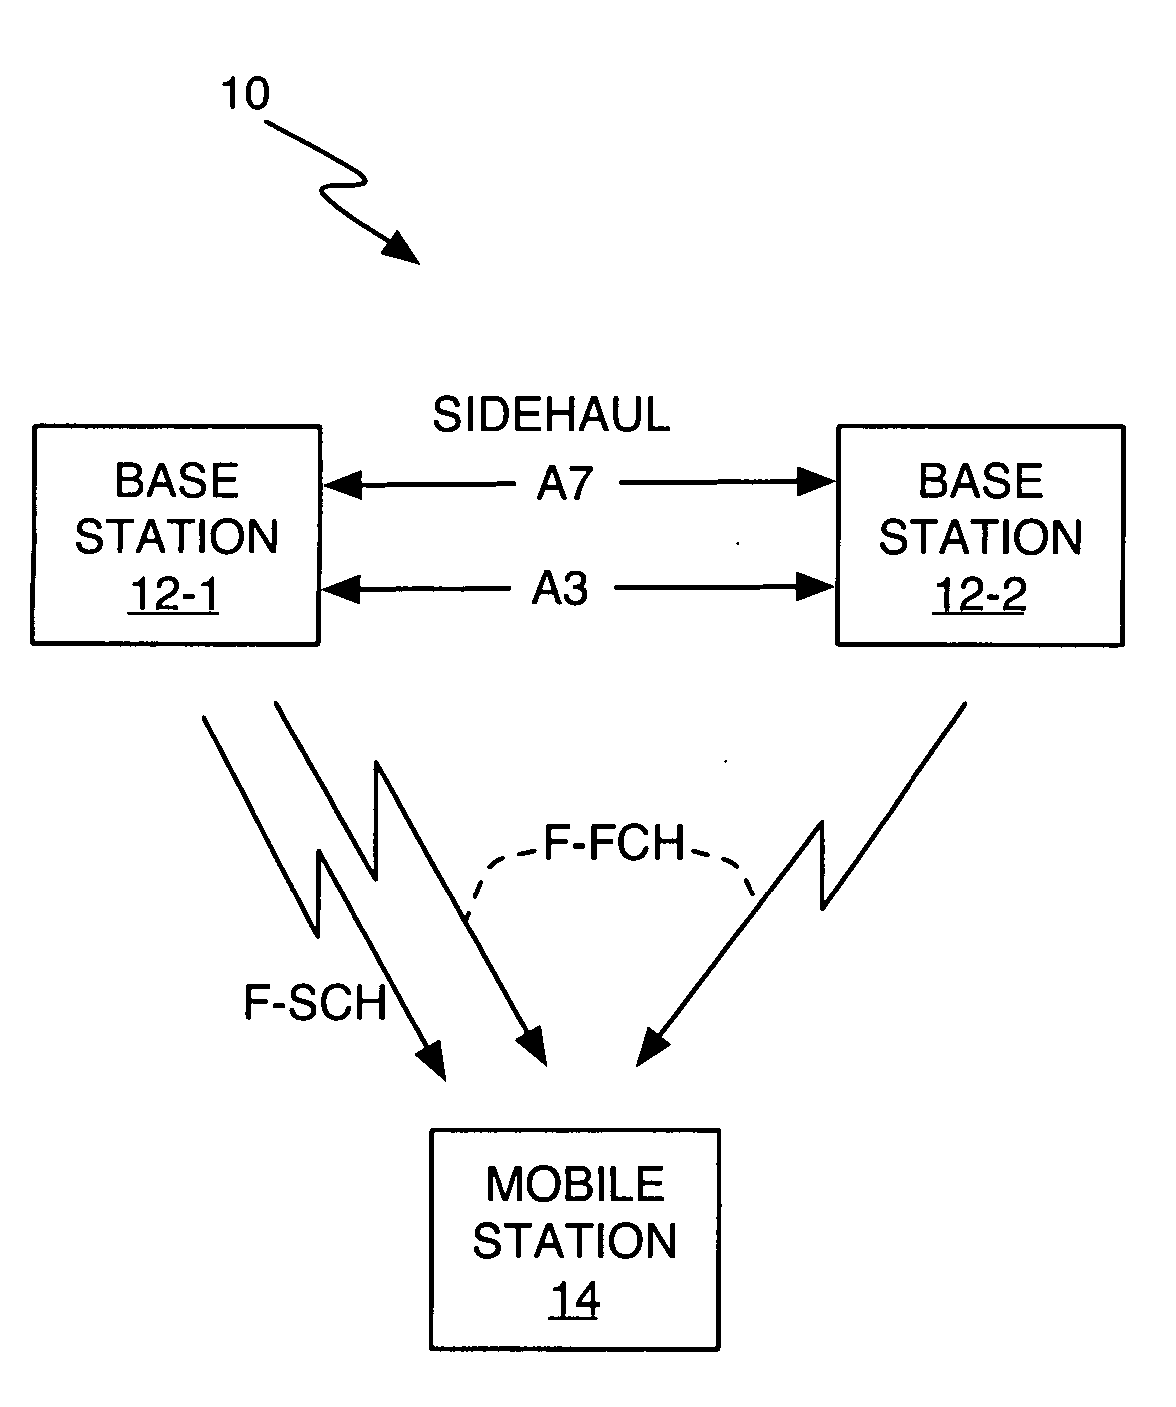 Radio configuration selection during inter-BS call handoff